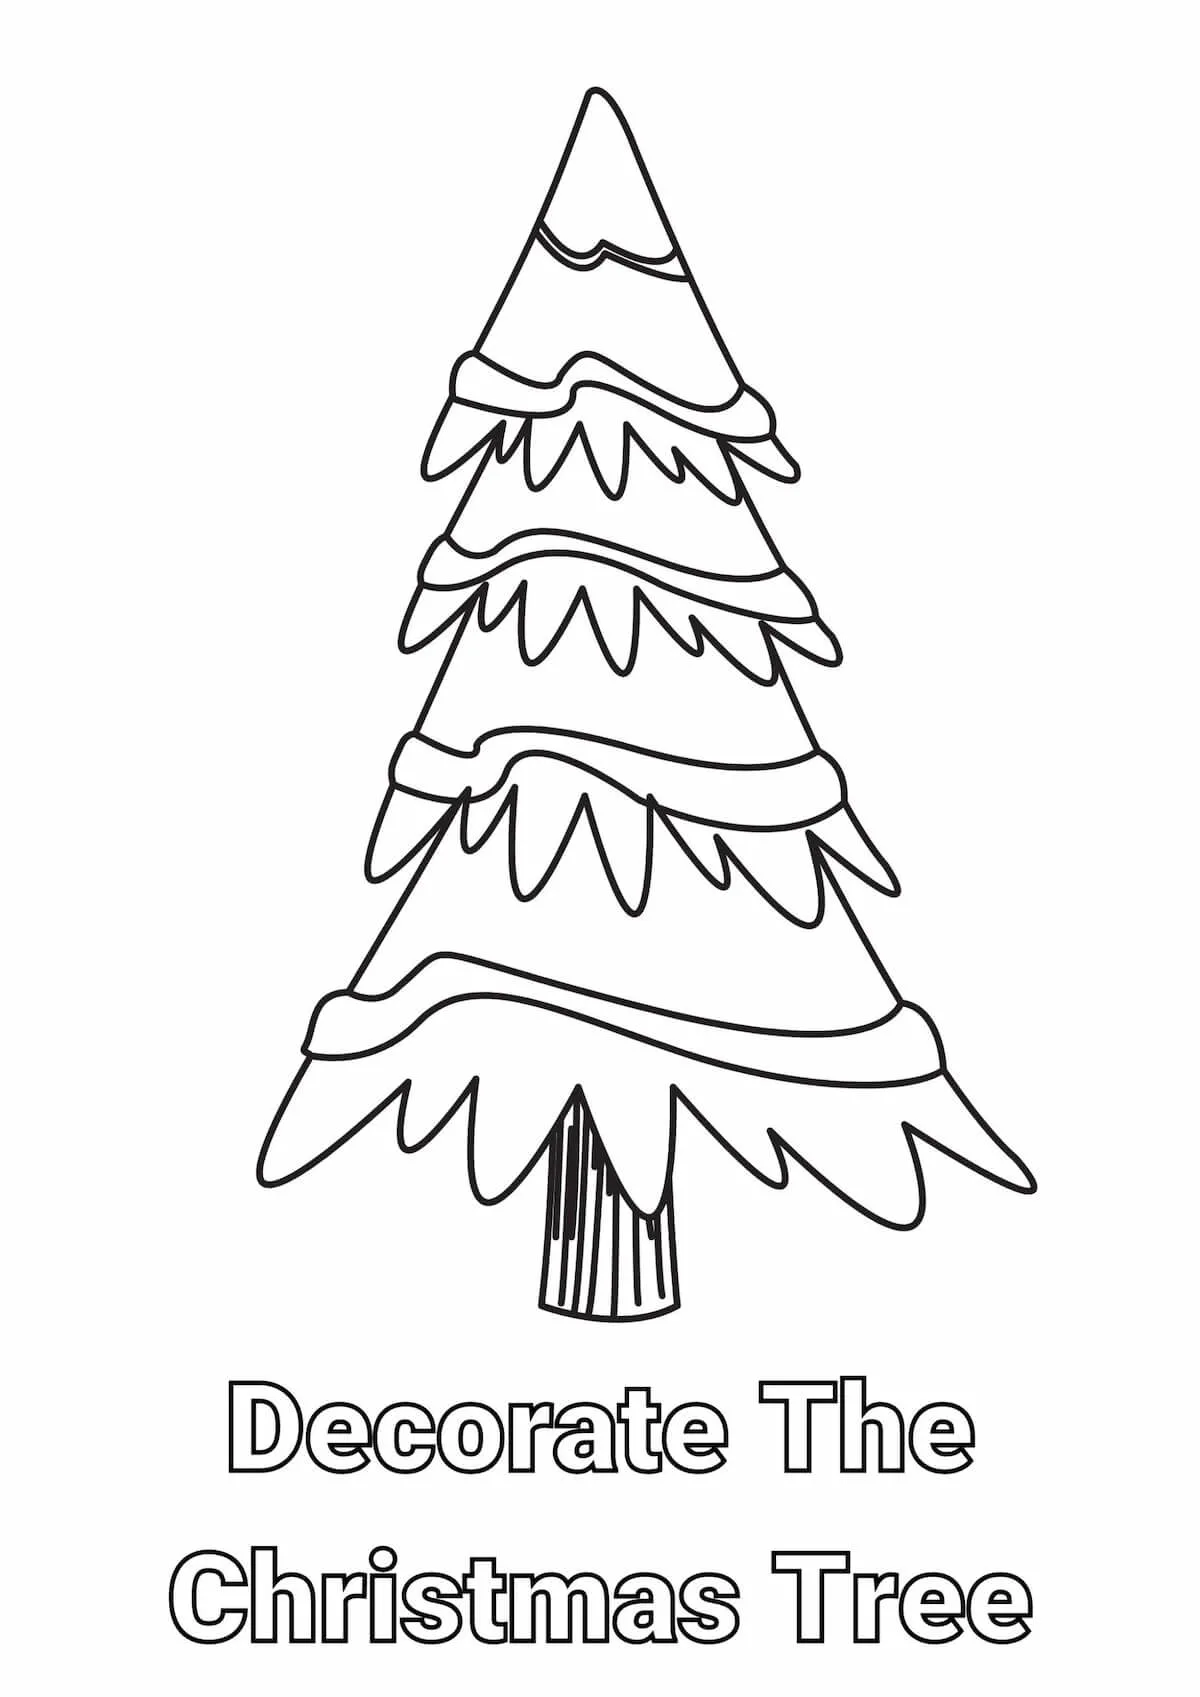 Decorate the christmas tree activity